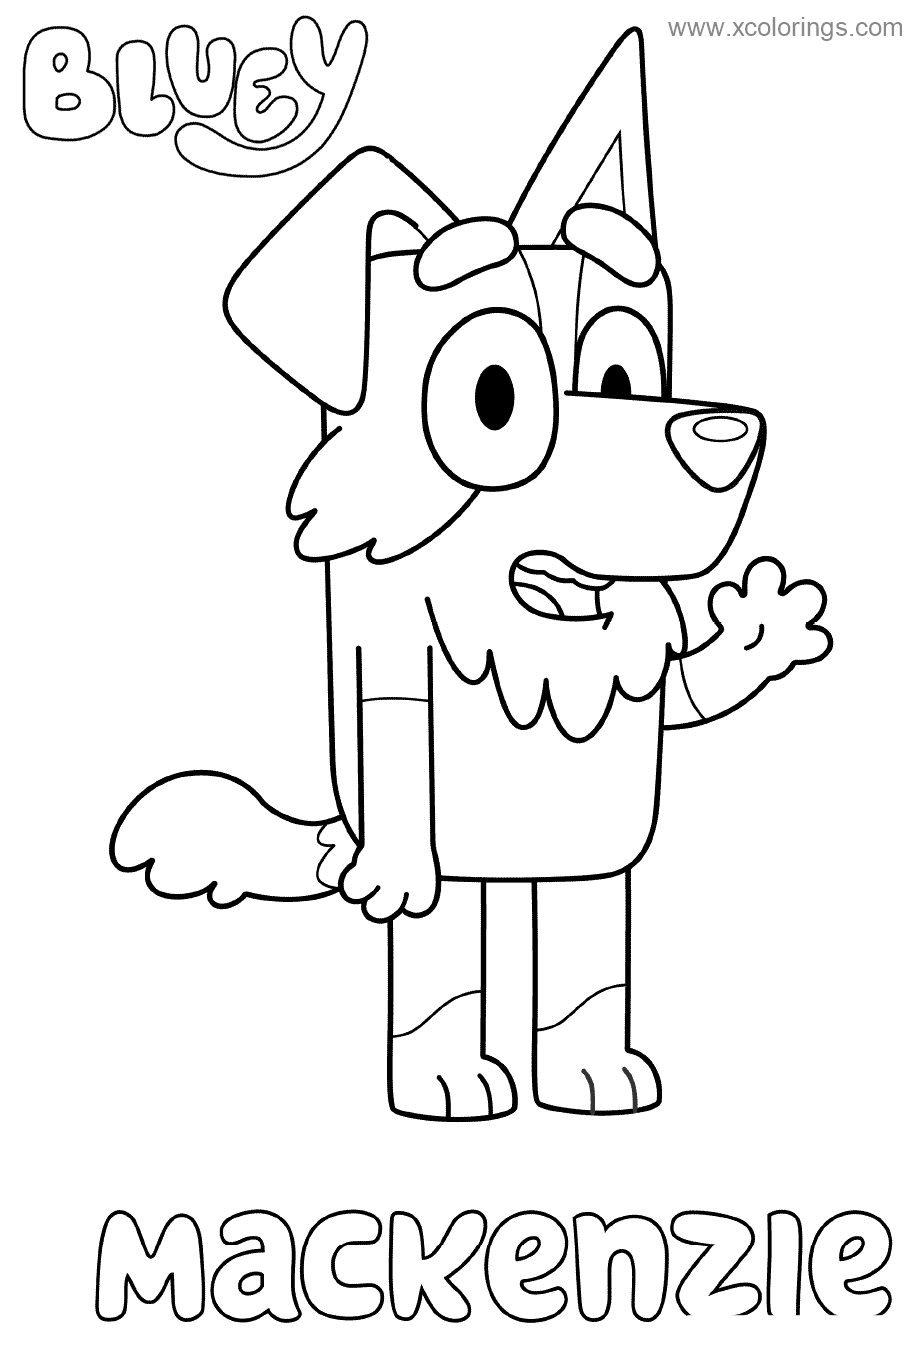 Free Mackenzie from Bluey Coloring Pages printable